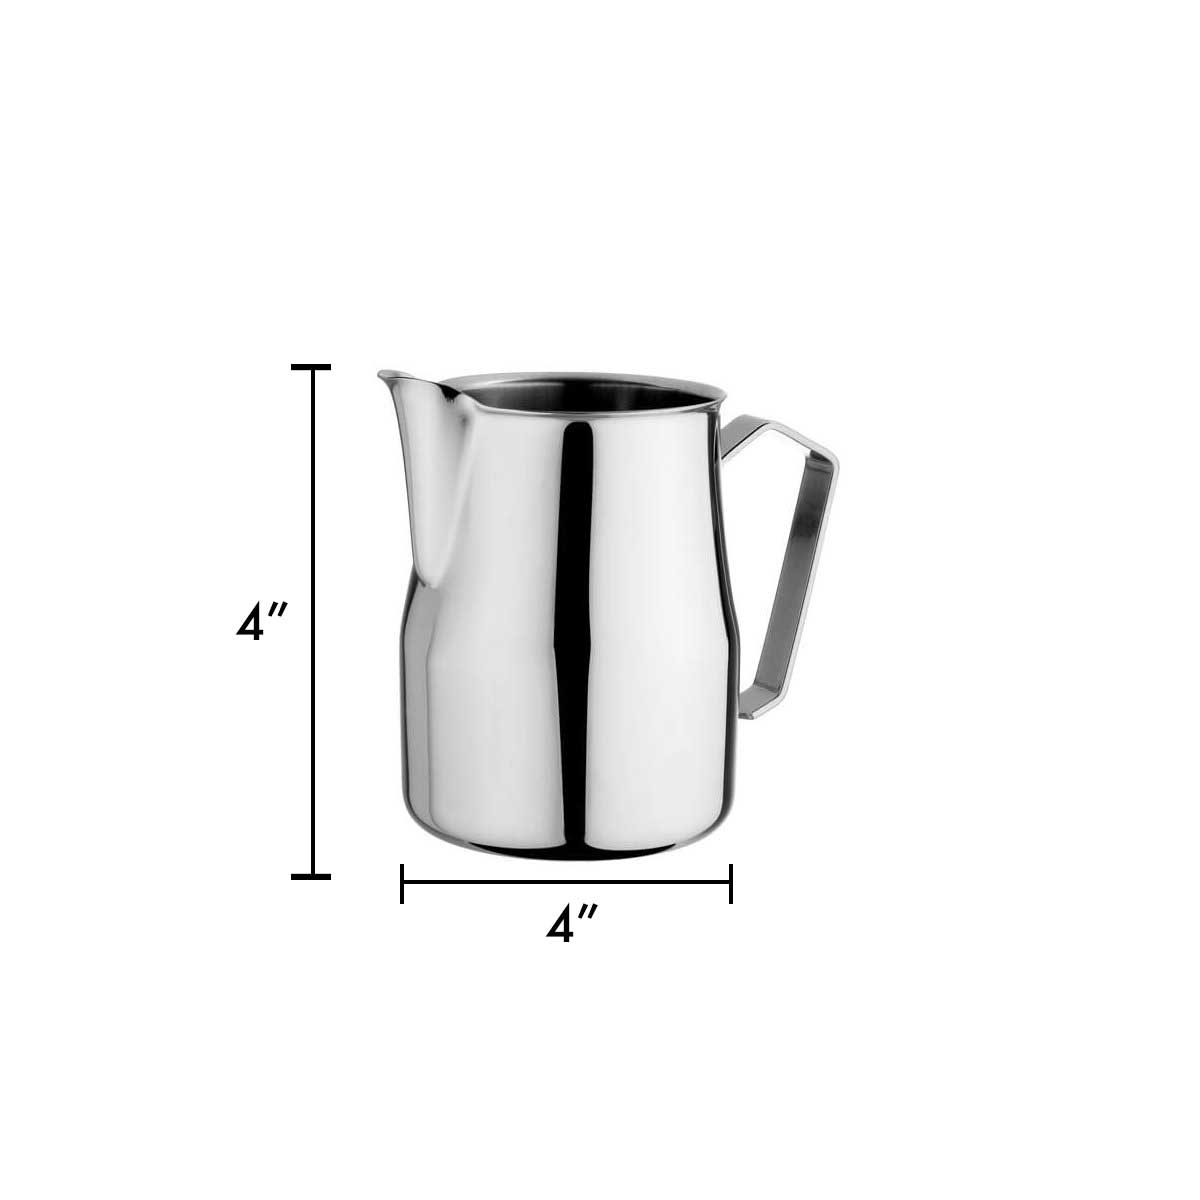 Motta Pitchers for Milk Frothing – Chris' Coffee